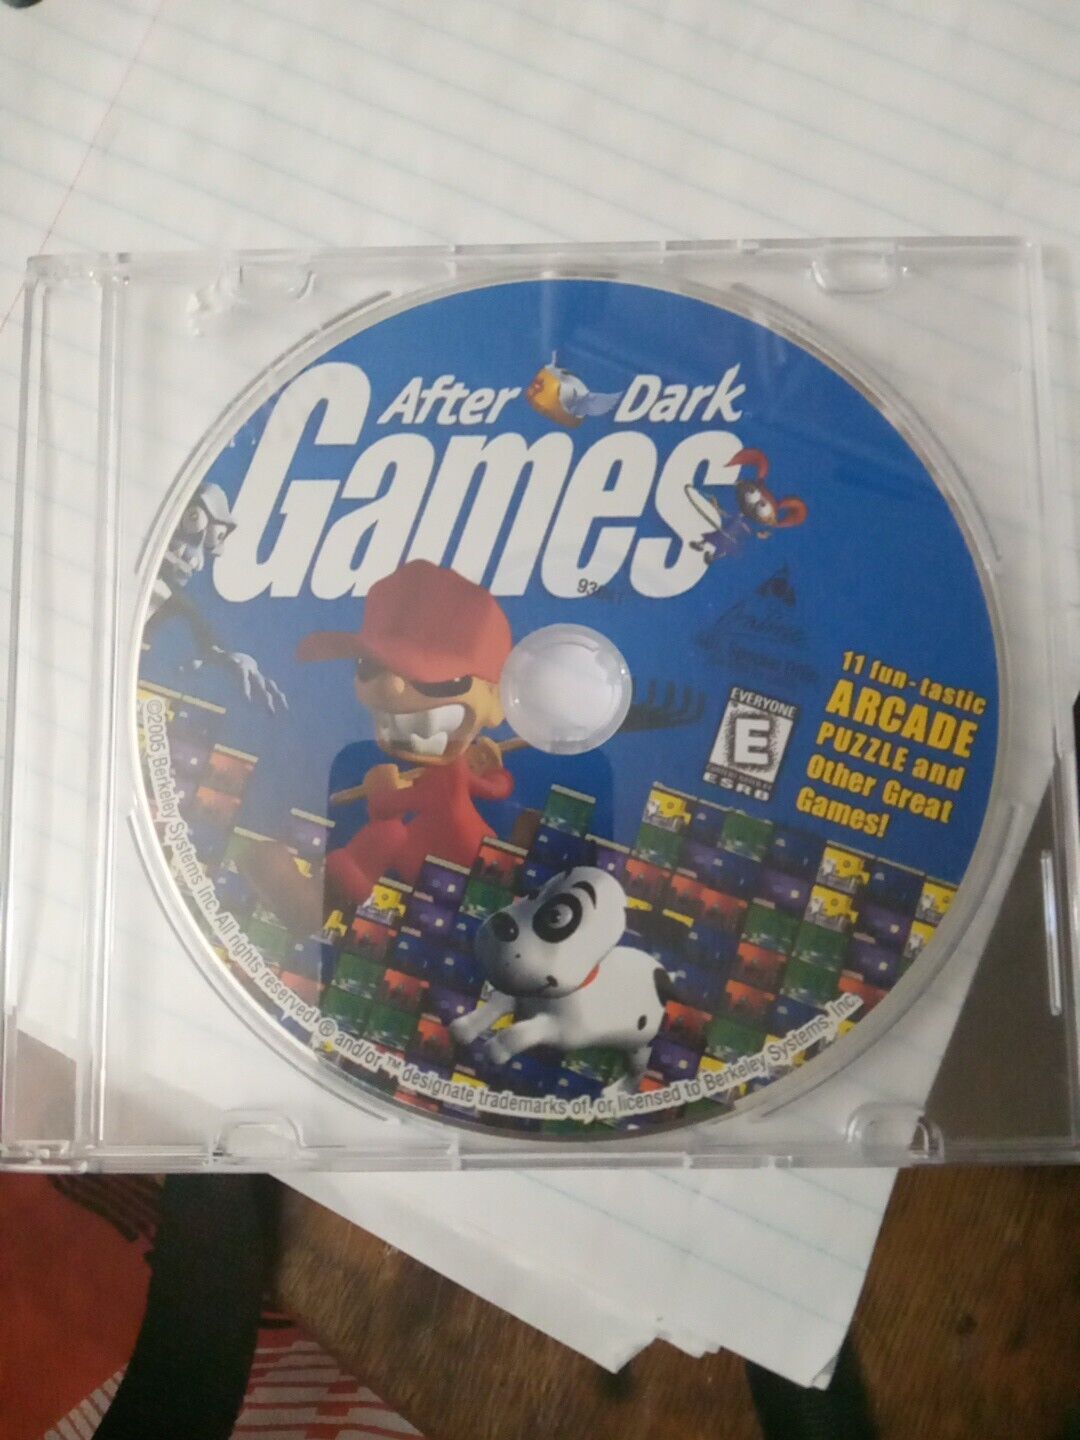 After Dark Games PC CD 11 word puzzle arcade trivia game collection Roof Rats